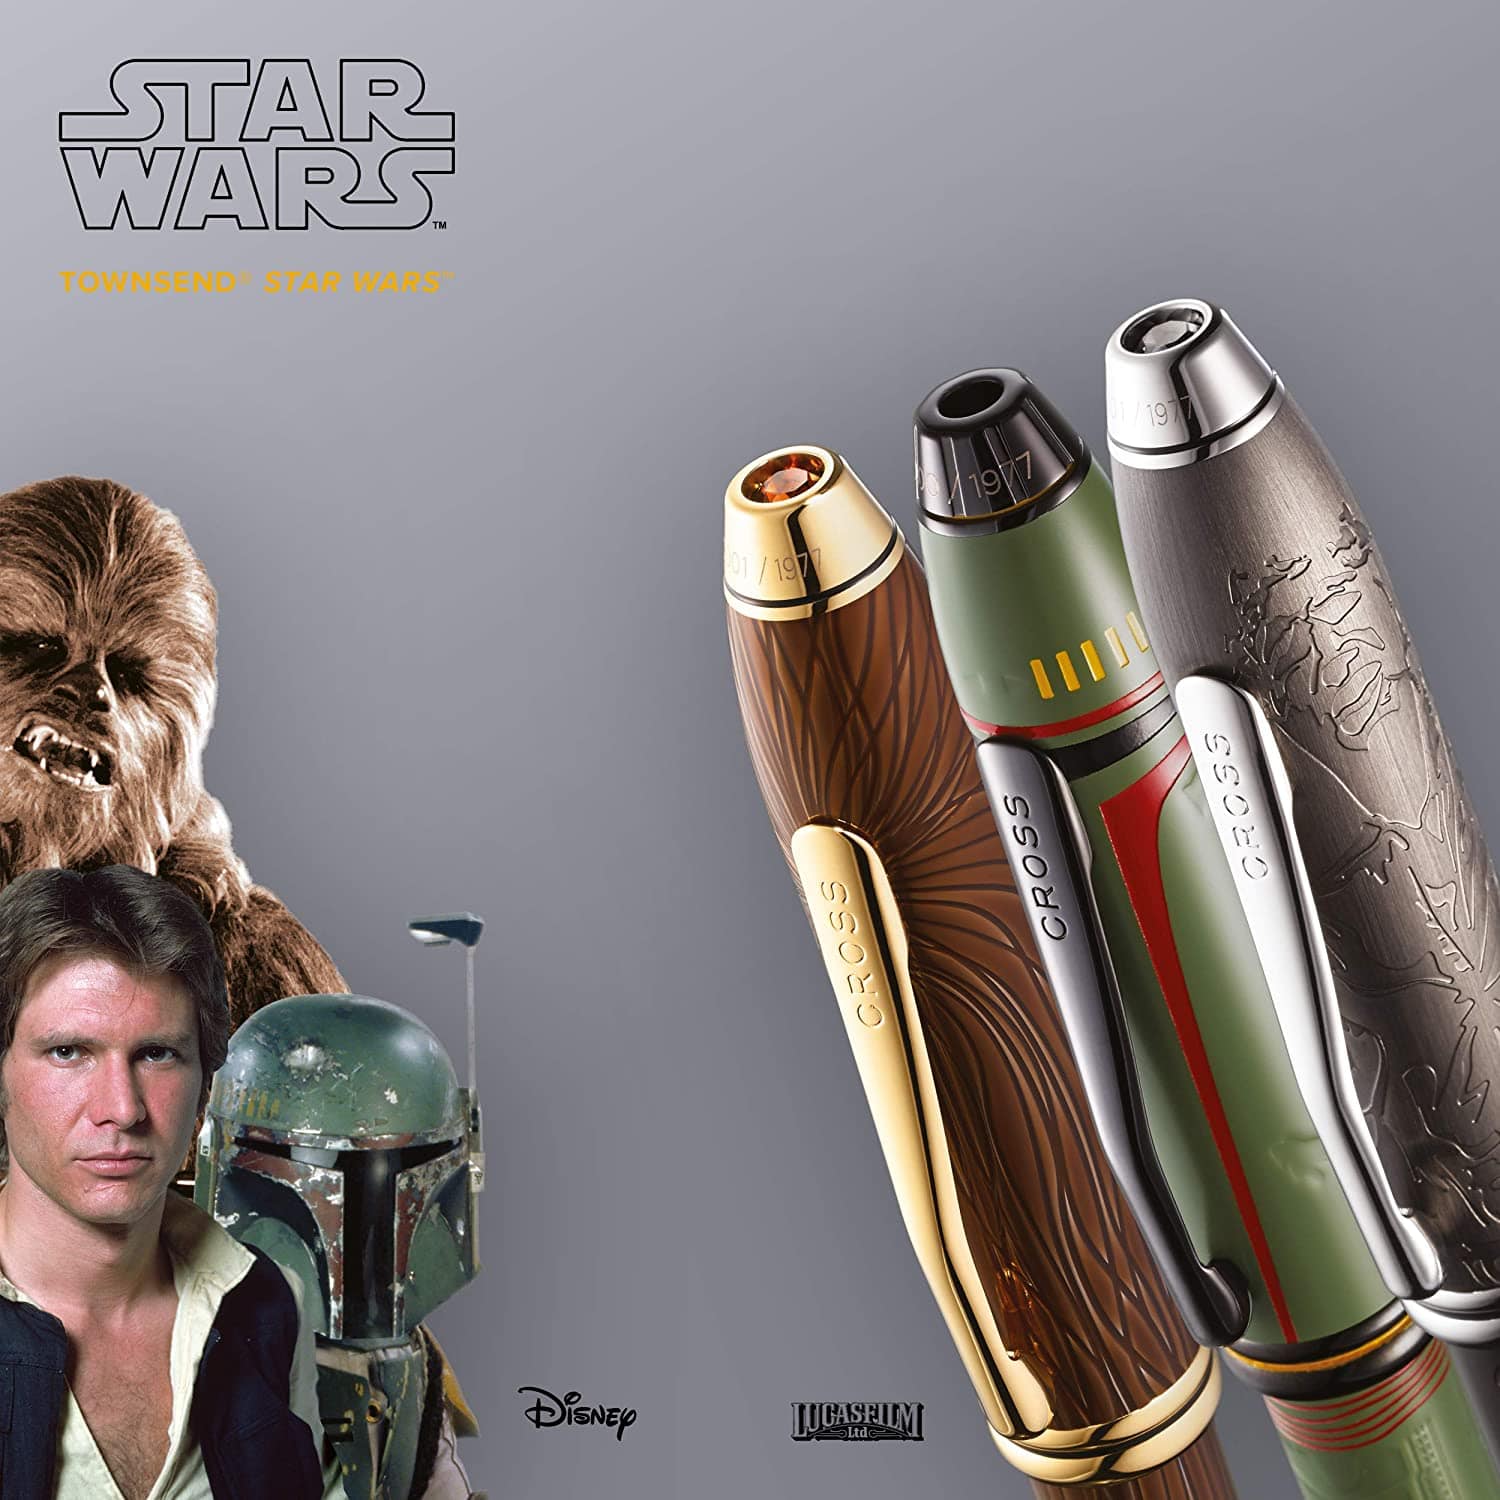 Cross Townsend Star Wars Limited Edition Chewbacca Rollerball Pen In A Gift Box - AT0045D-47